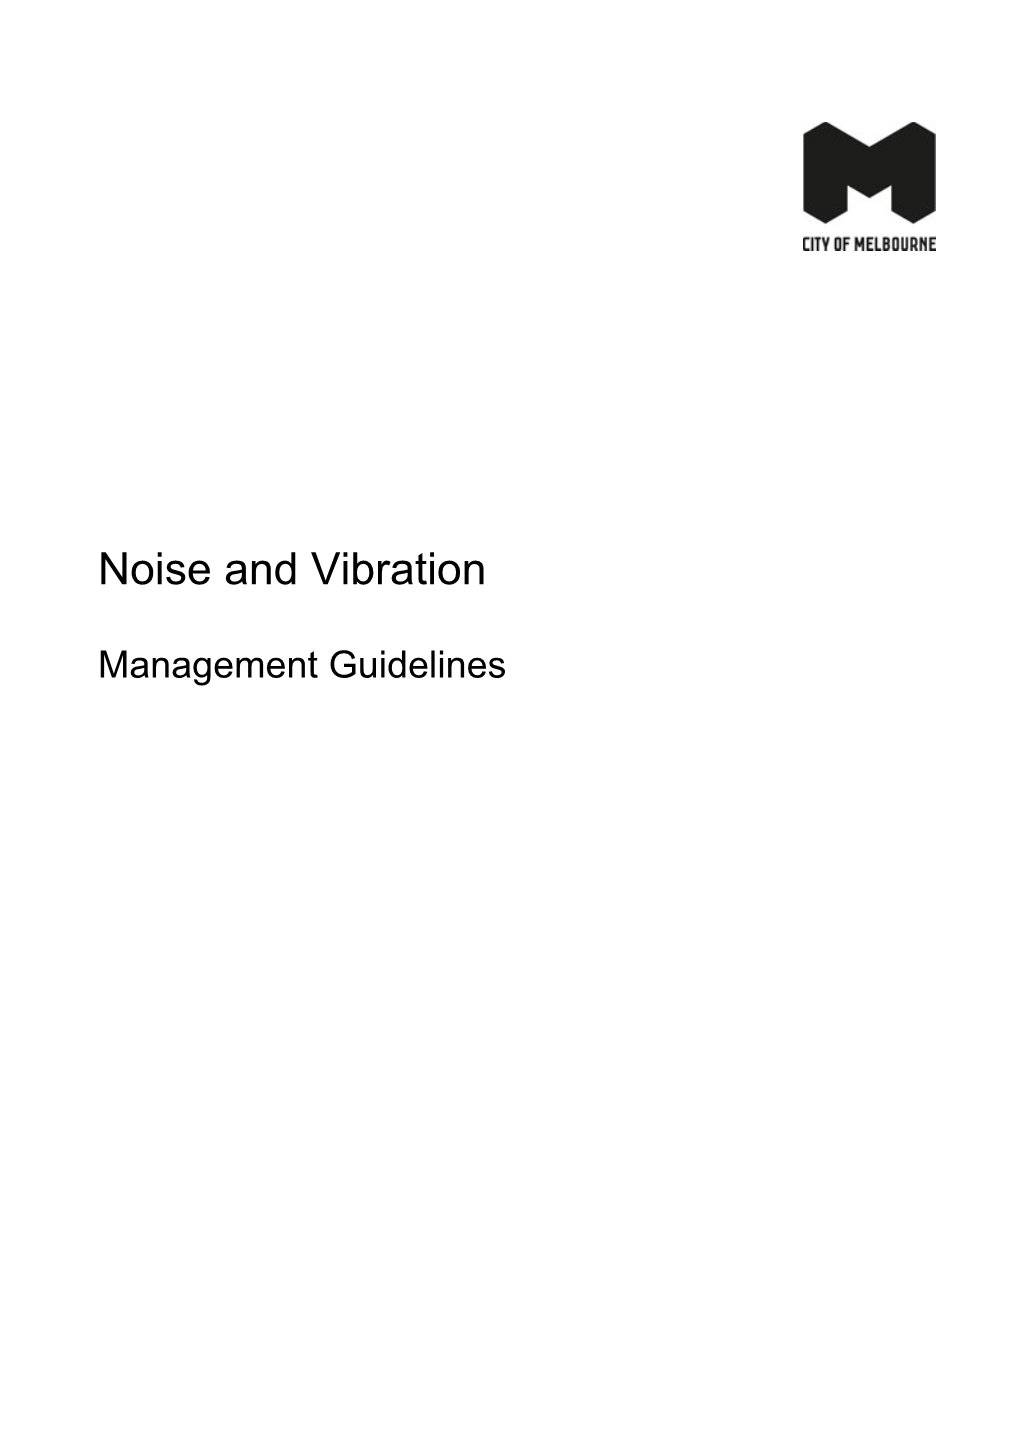 Noise and Vibration Management Guidelines